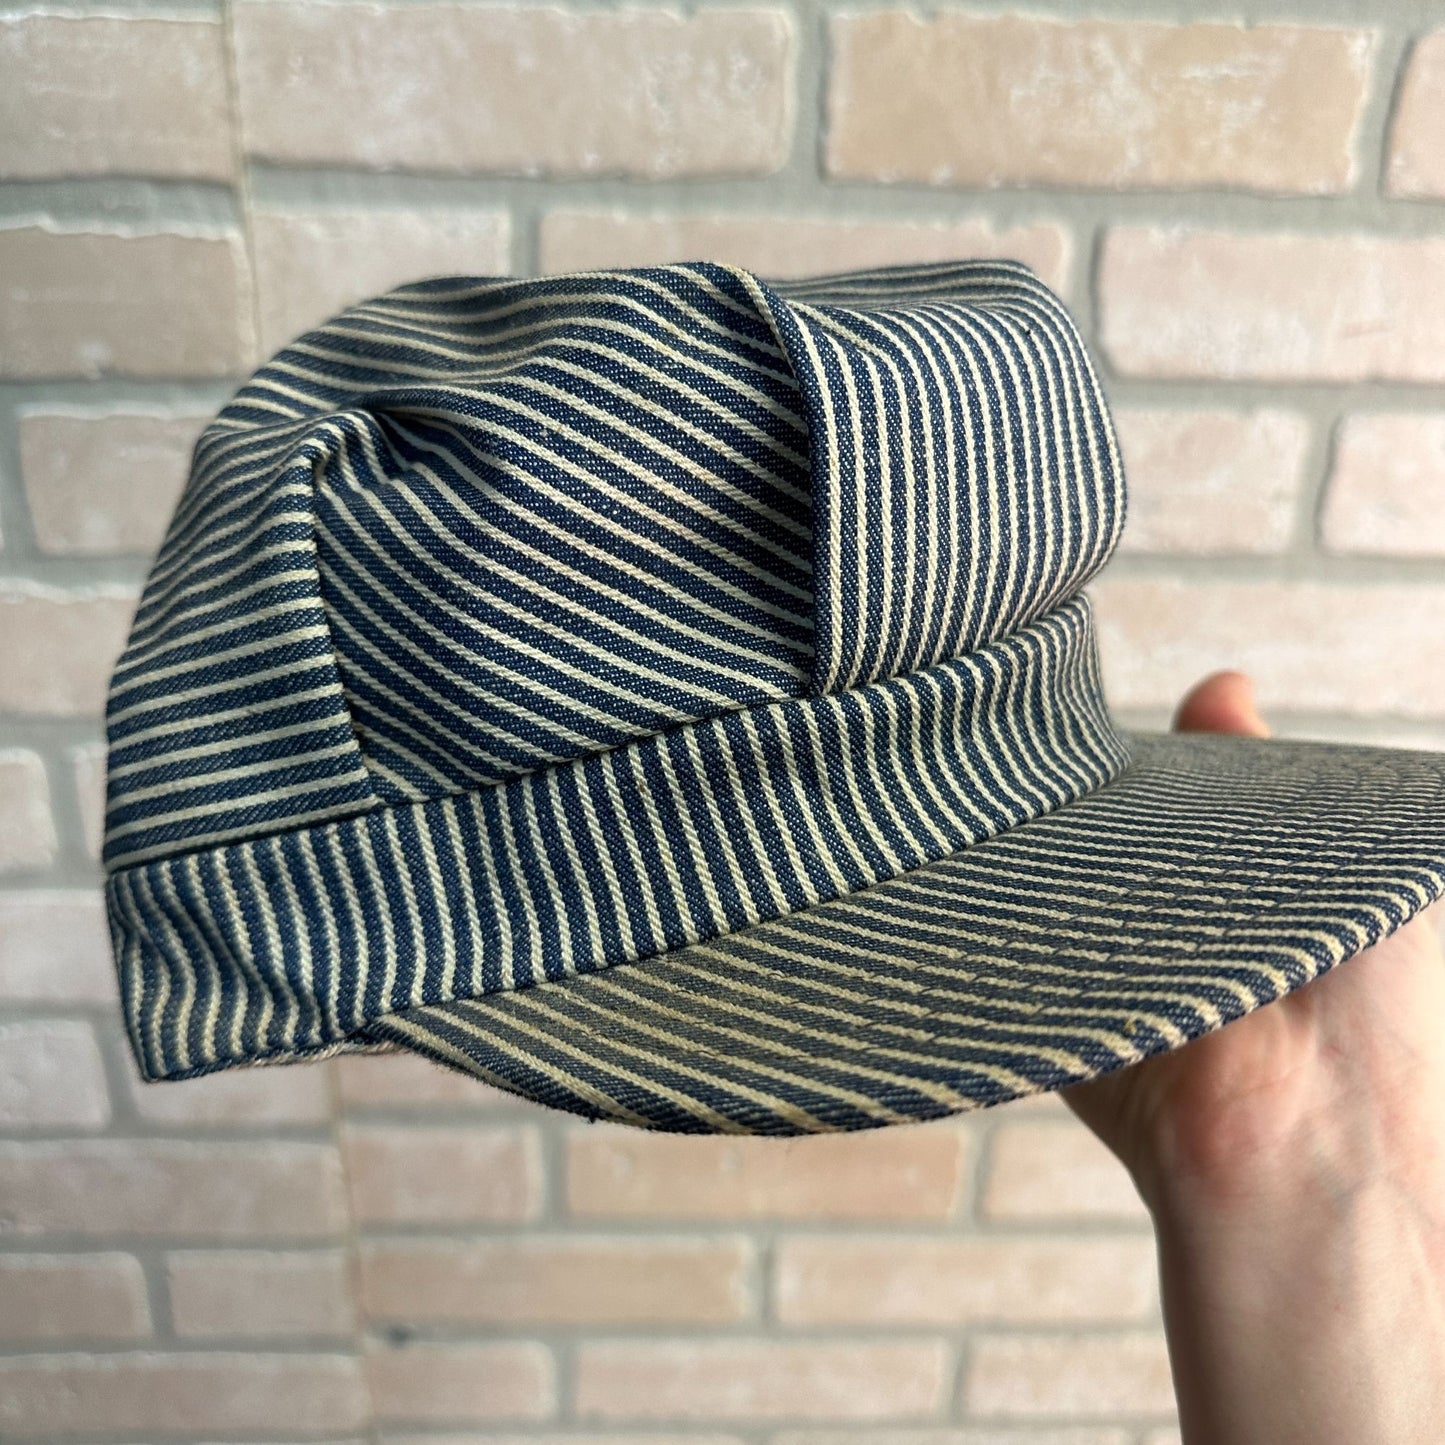 VINTAGE USA MADE PIN STRIPE RAILROAD WORKERS CONDUCTOR HAT